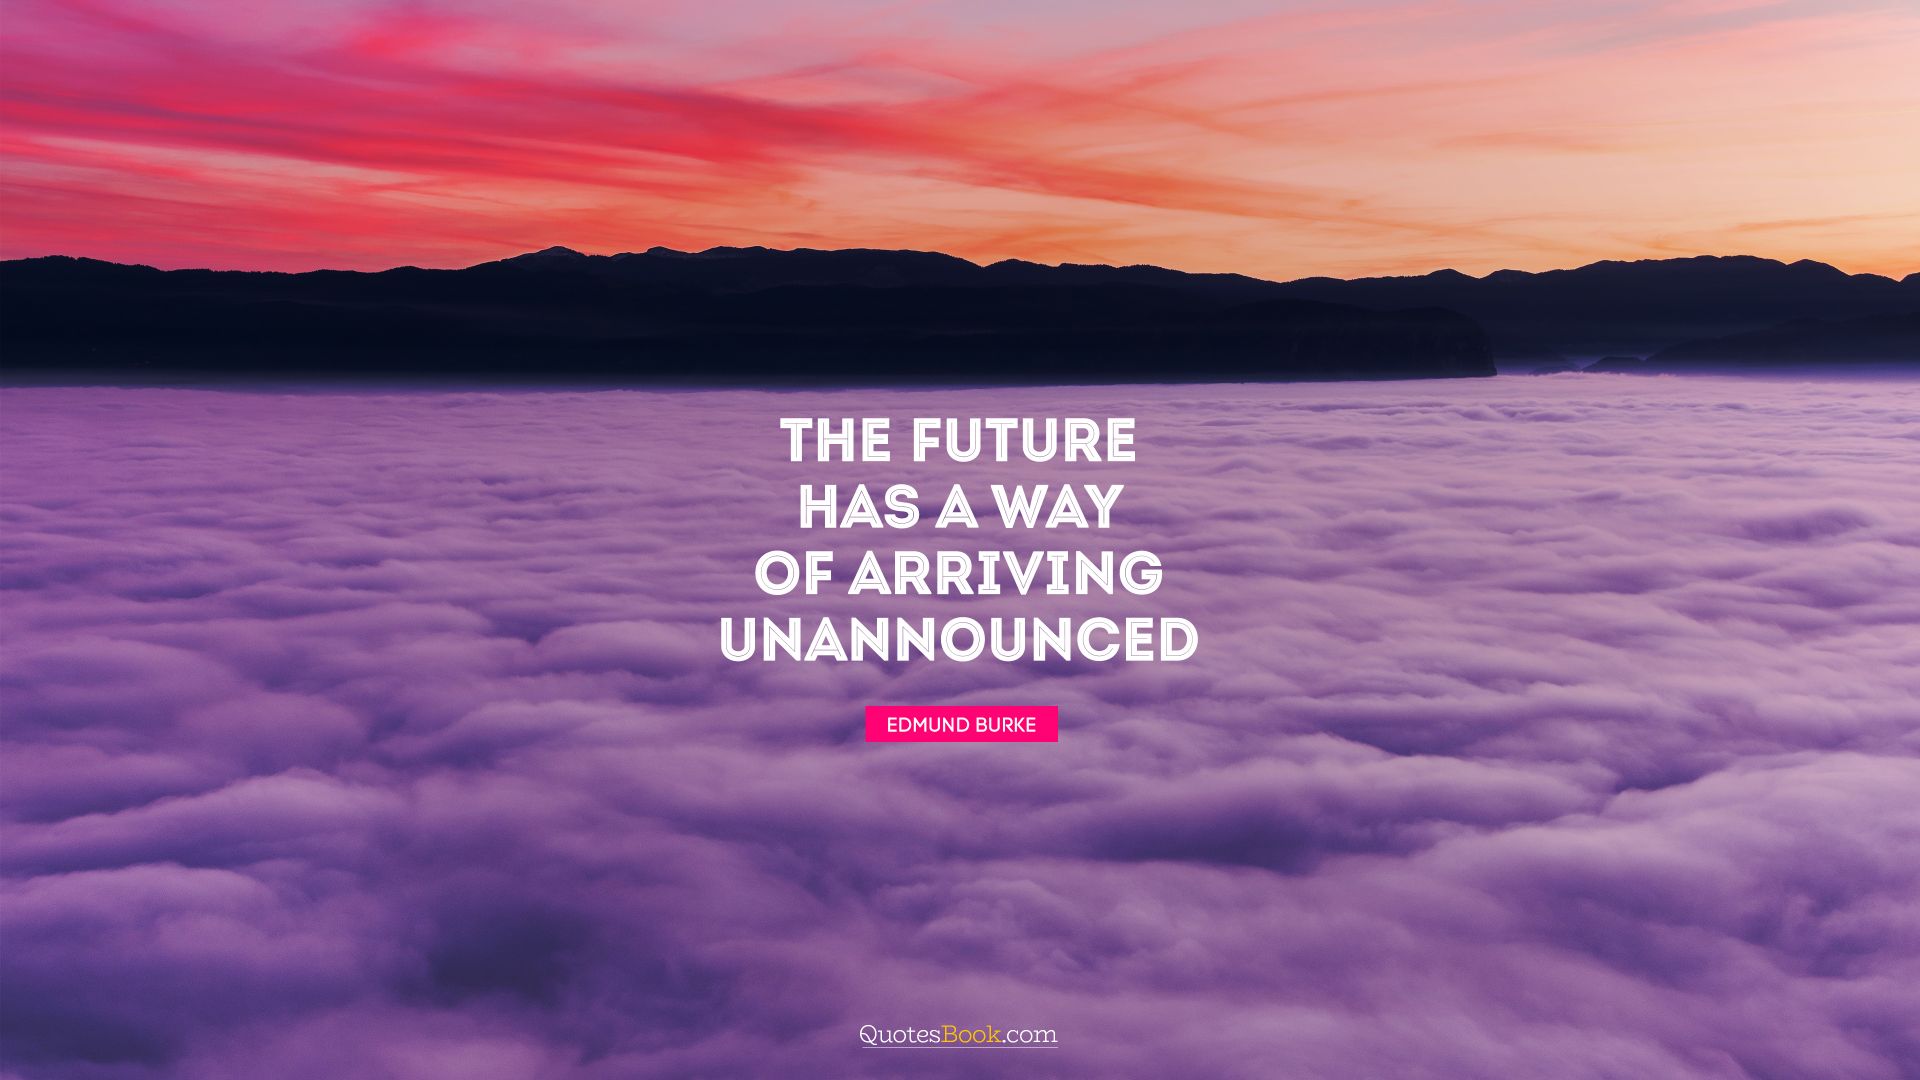 The future has a way of arriving unannounced. - Quote by George Will